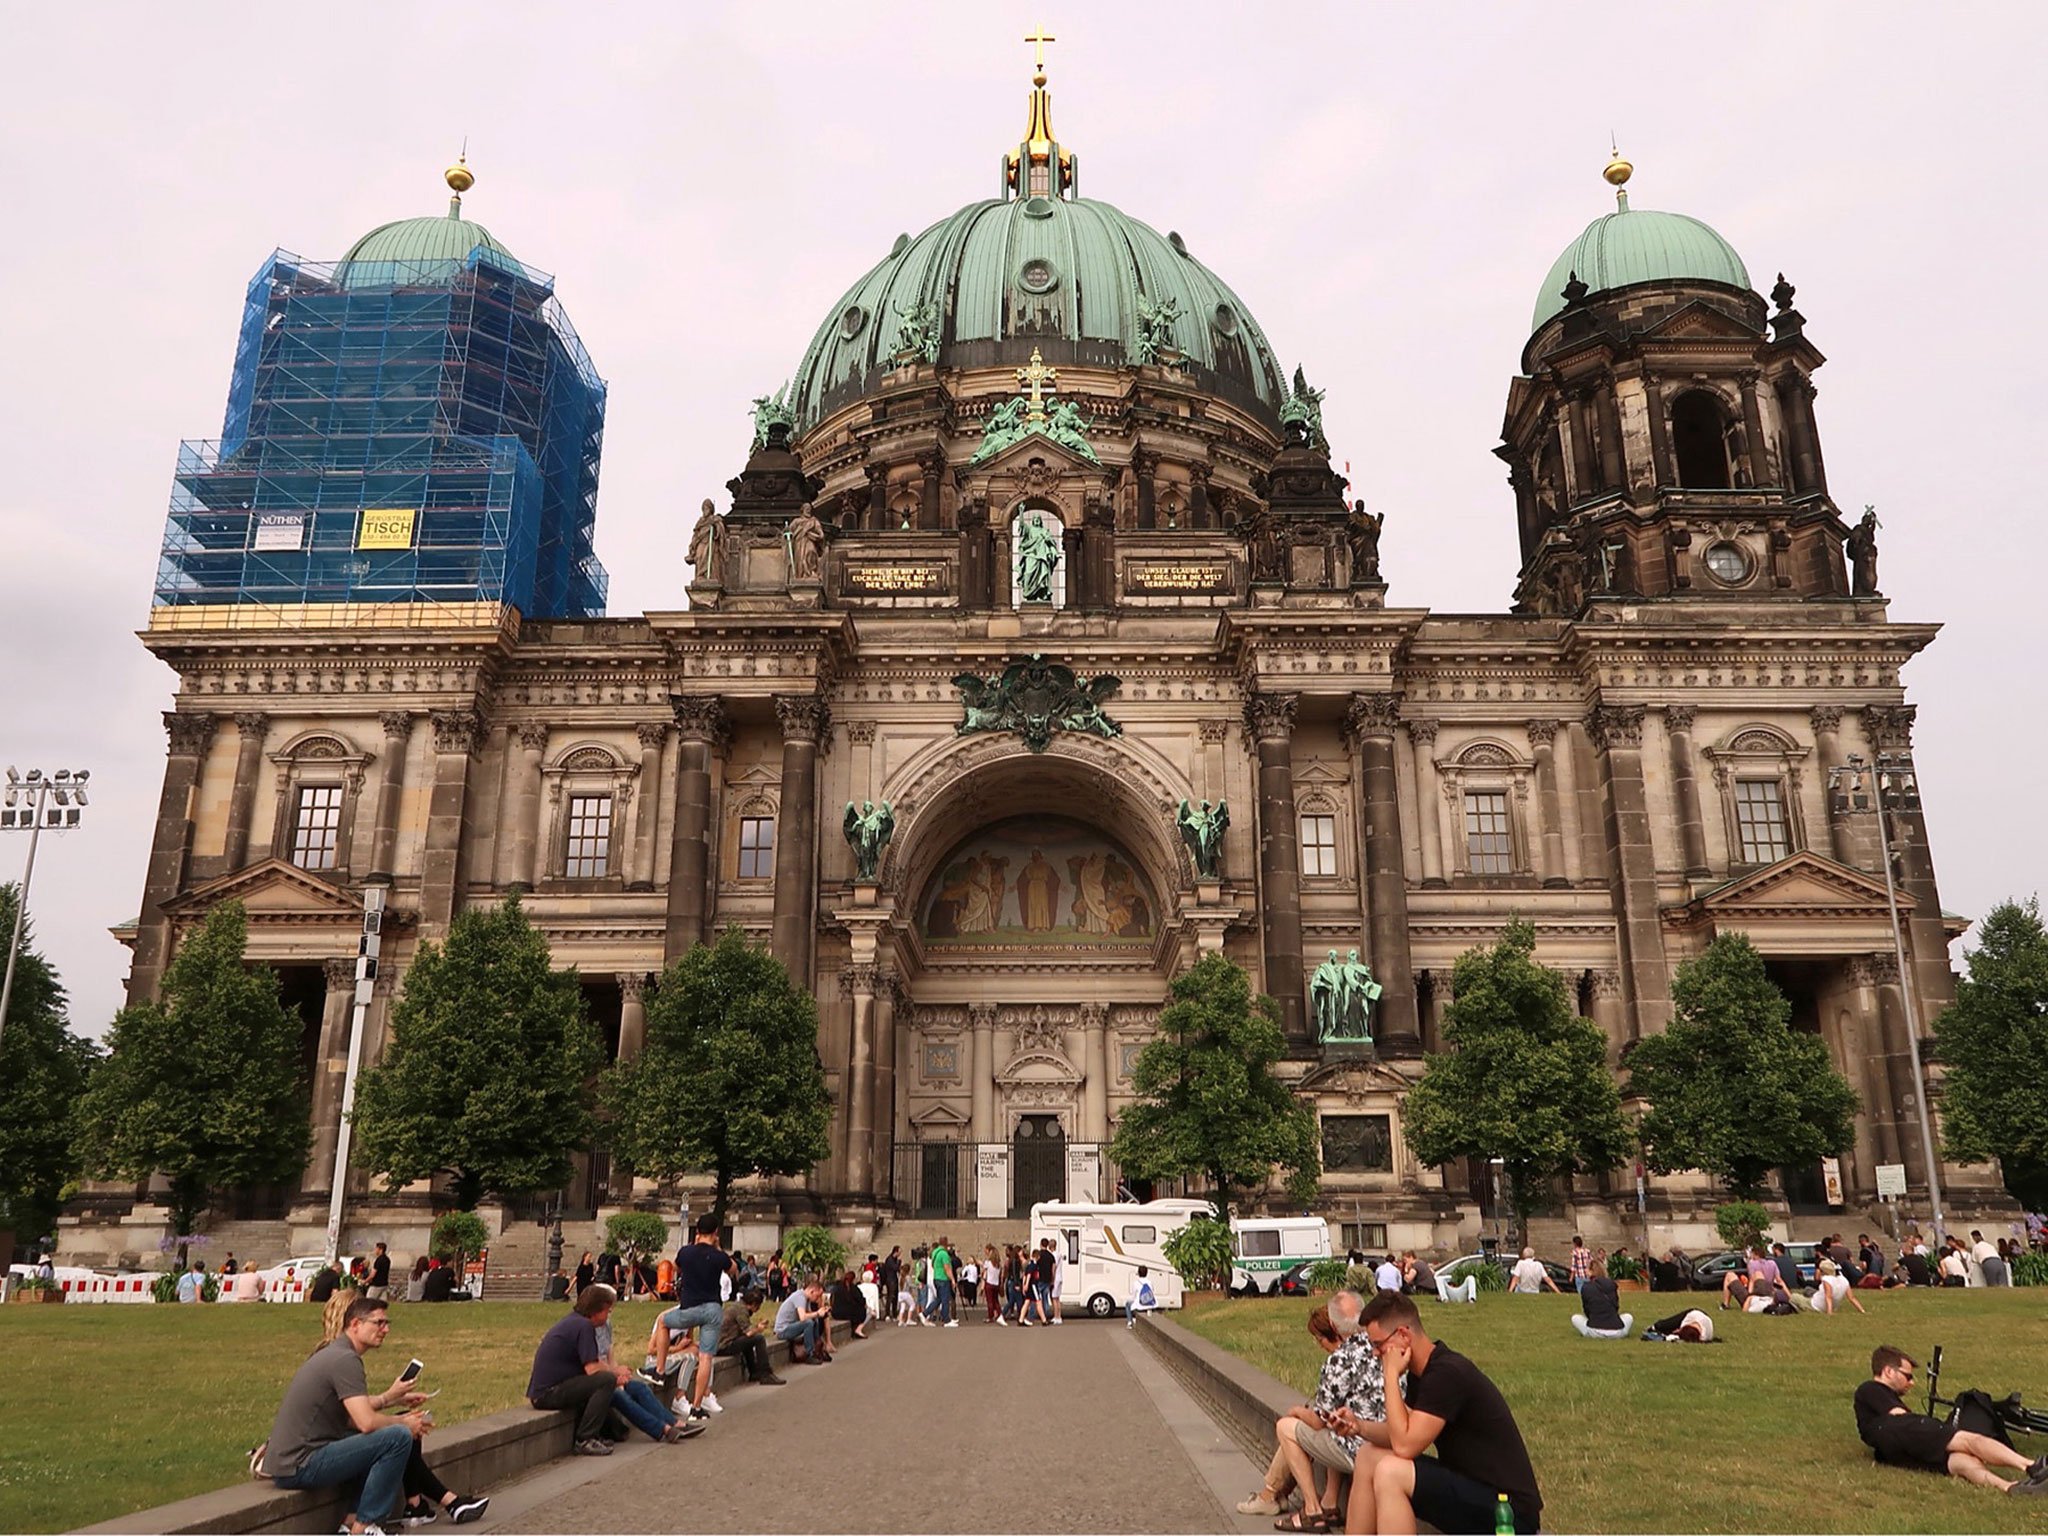 German police shoot a man in Berlin Cathedral and cordon off area ...